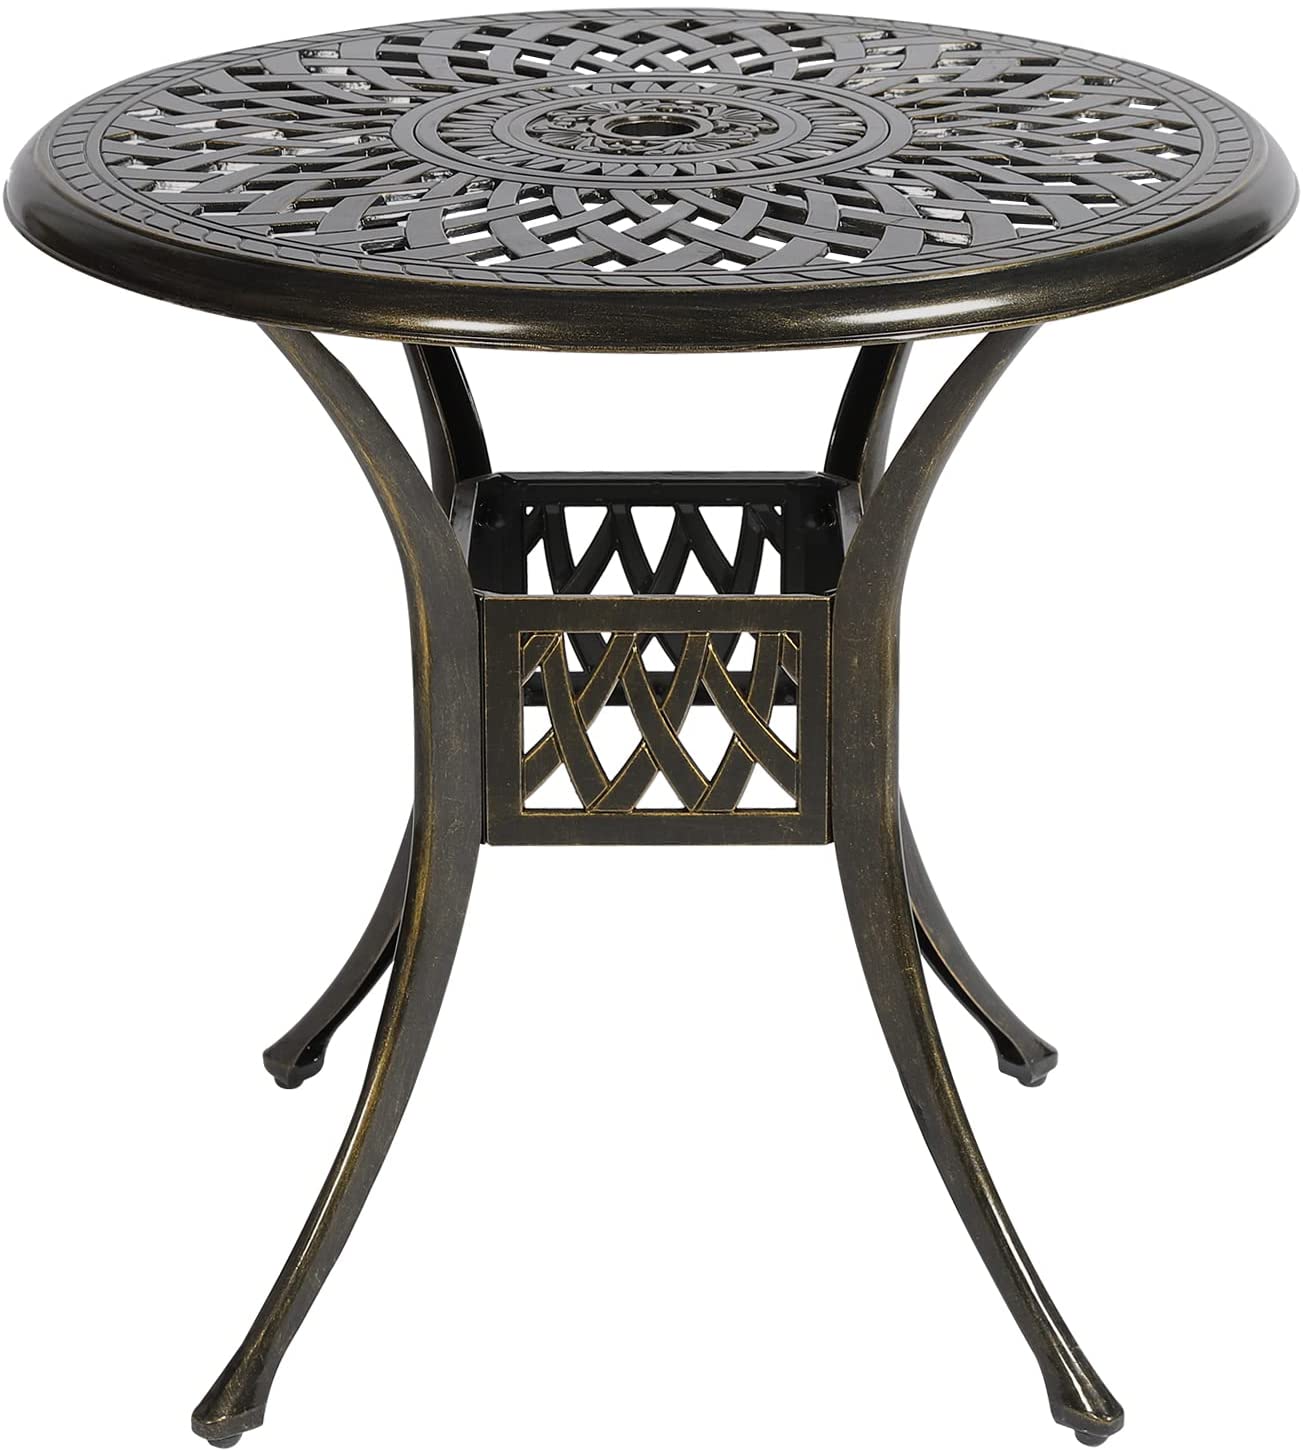 MEETWARM 31" Round Patio Bistro Table, Outdoor Cast Aluminum Small Dinning Table with 2" Umbrella Hole, Dark Bronze - image 1 of 7